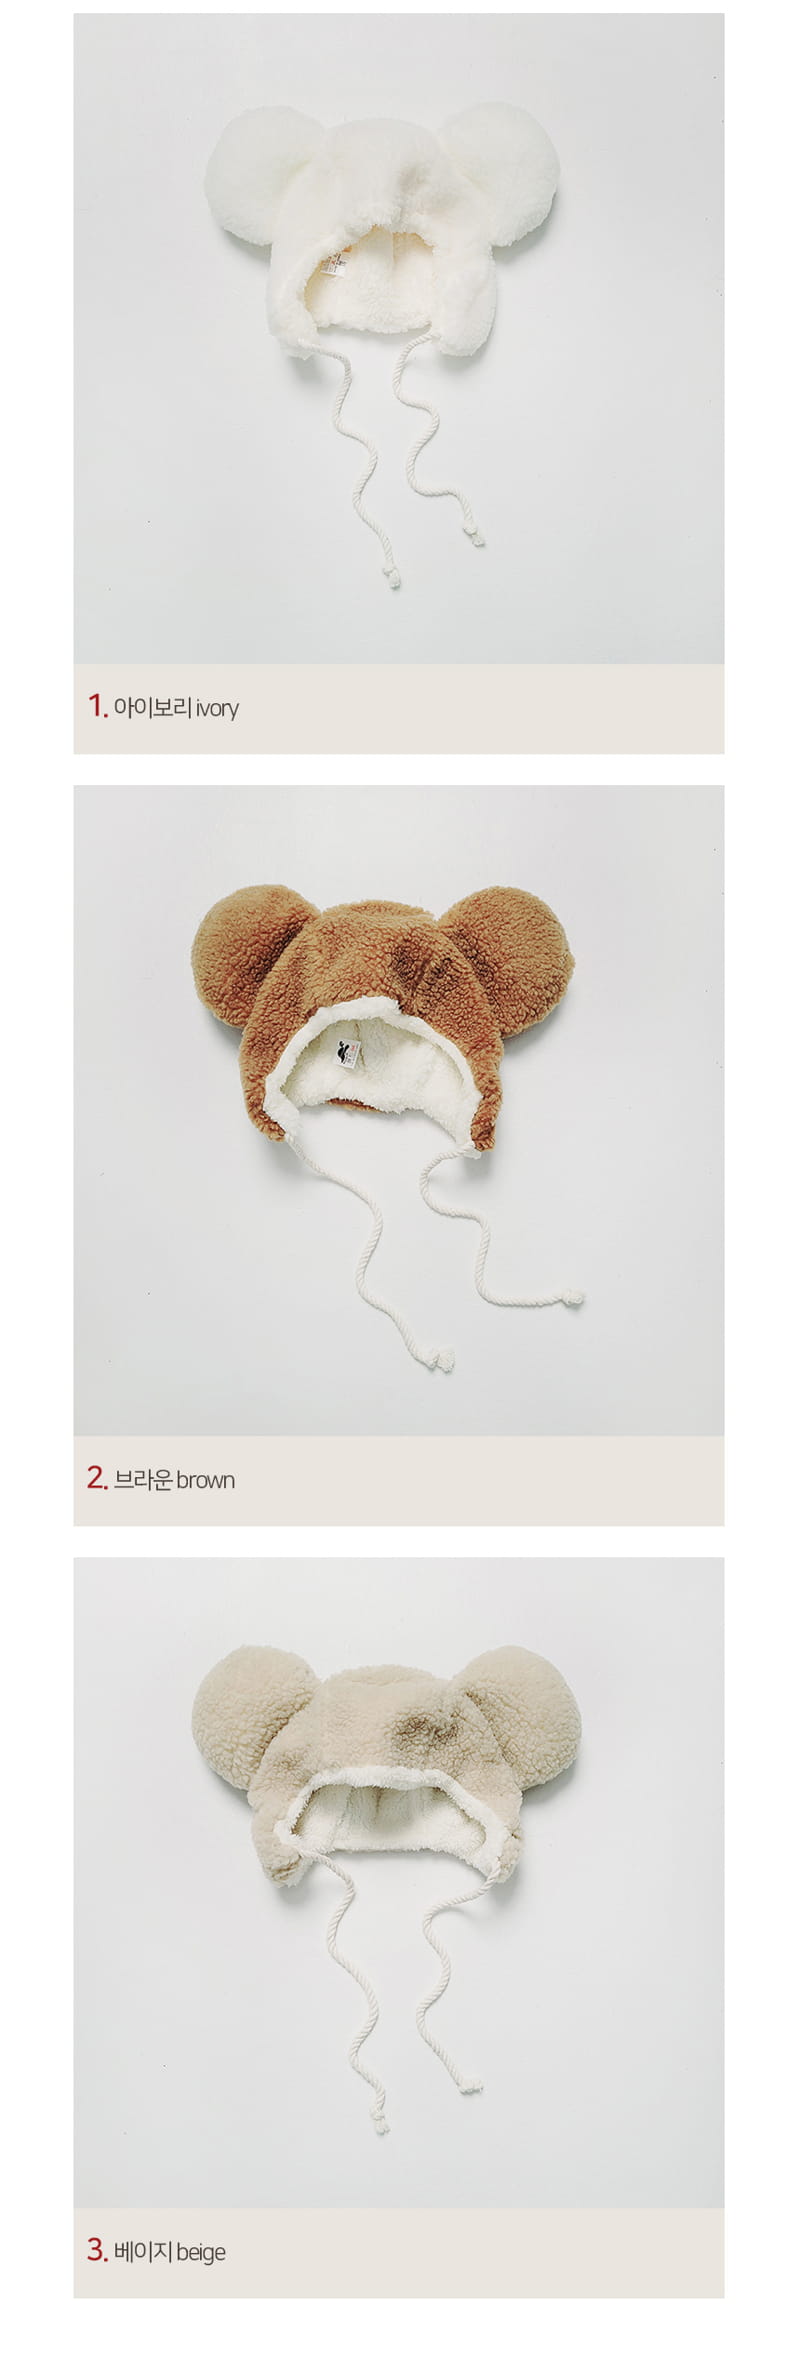 Daily Daily - Korean Children Fashion - #kidsshorts - Our Home Bear Hat - 3